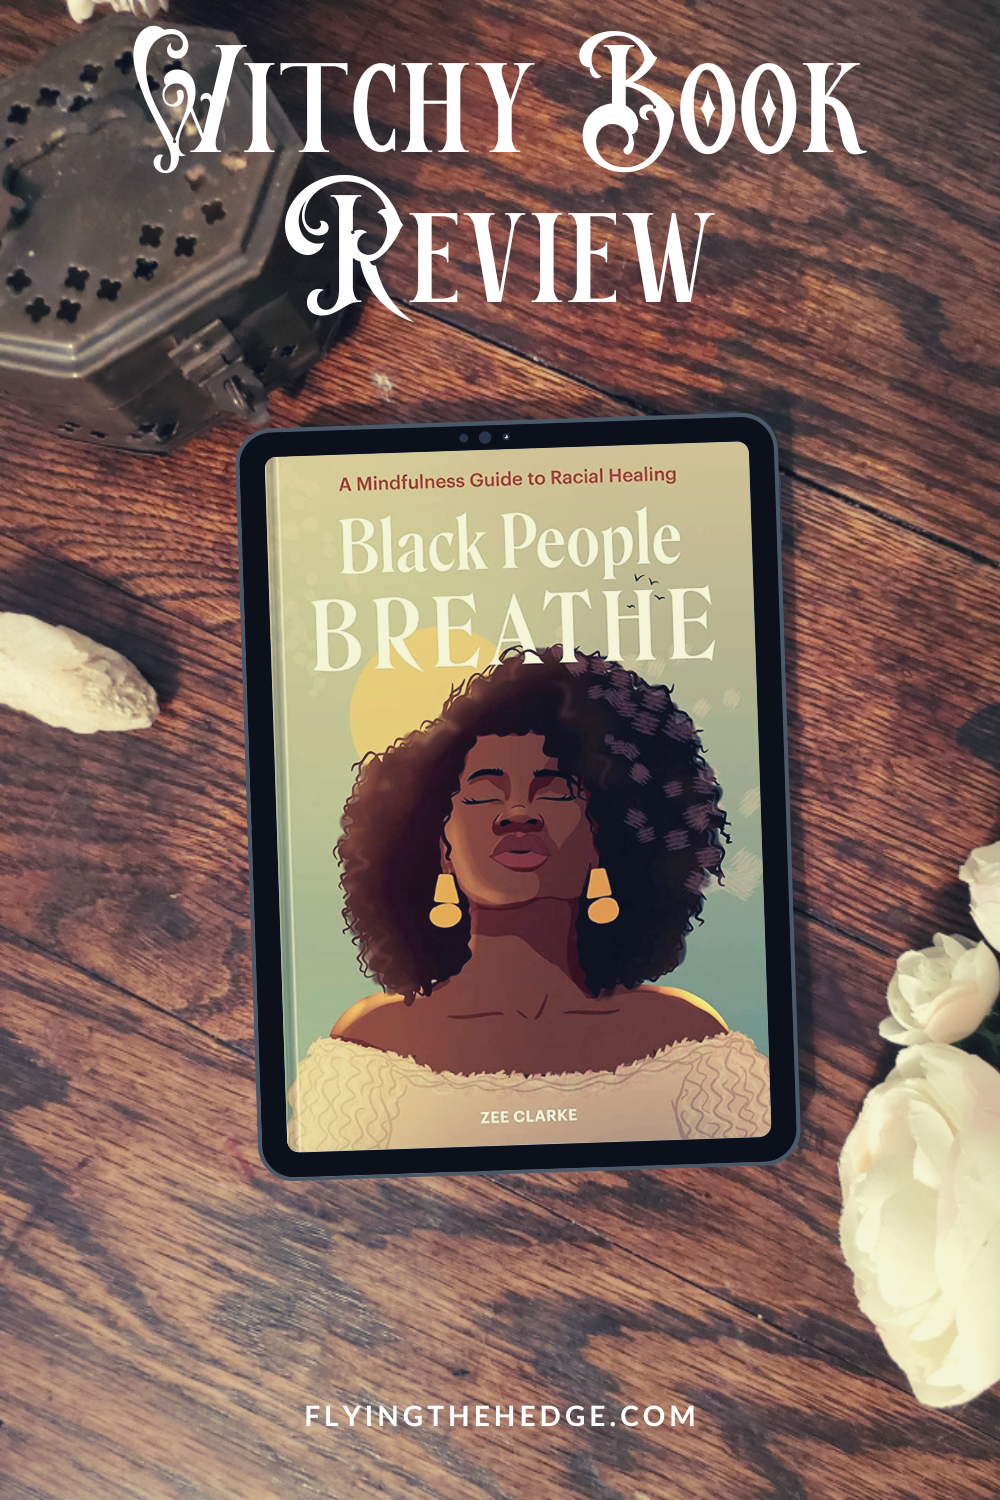 breathwork, spiritual, meditation, racial healing, breathing, book review, witch, witchcraft, occult, spiritual, wicca, wiccan, pagan